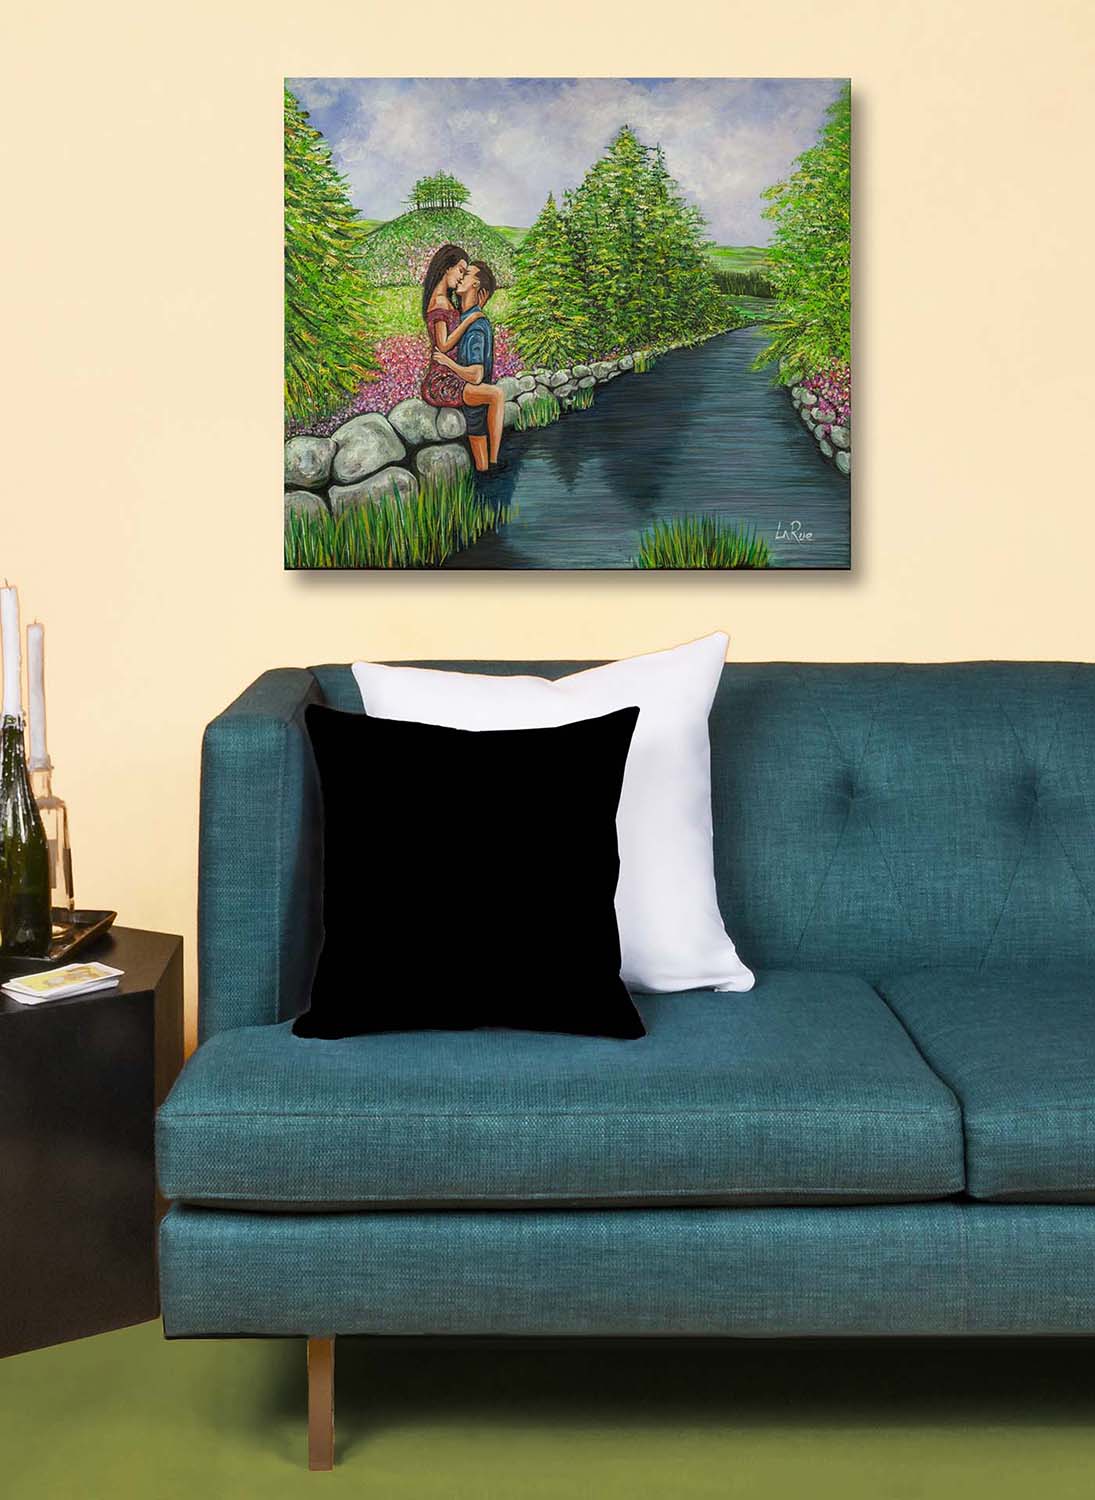 Passion Creek oil painting by Doug LaRue large print over a couch